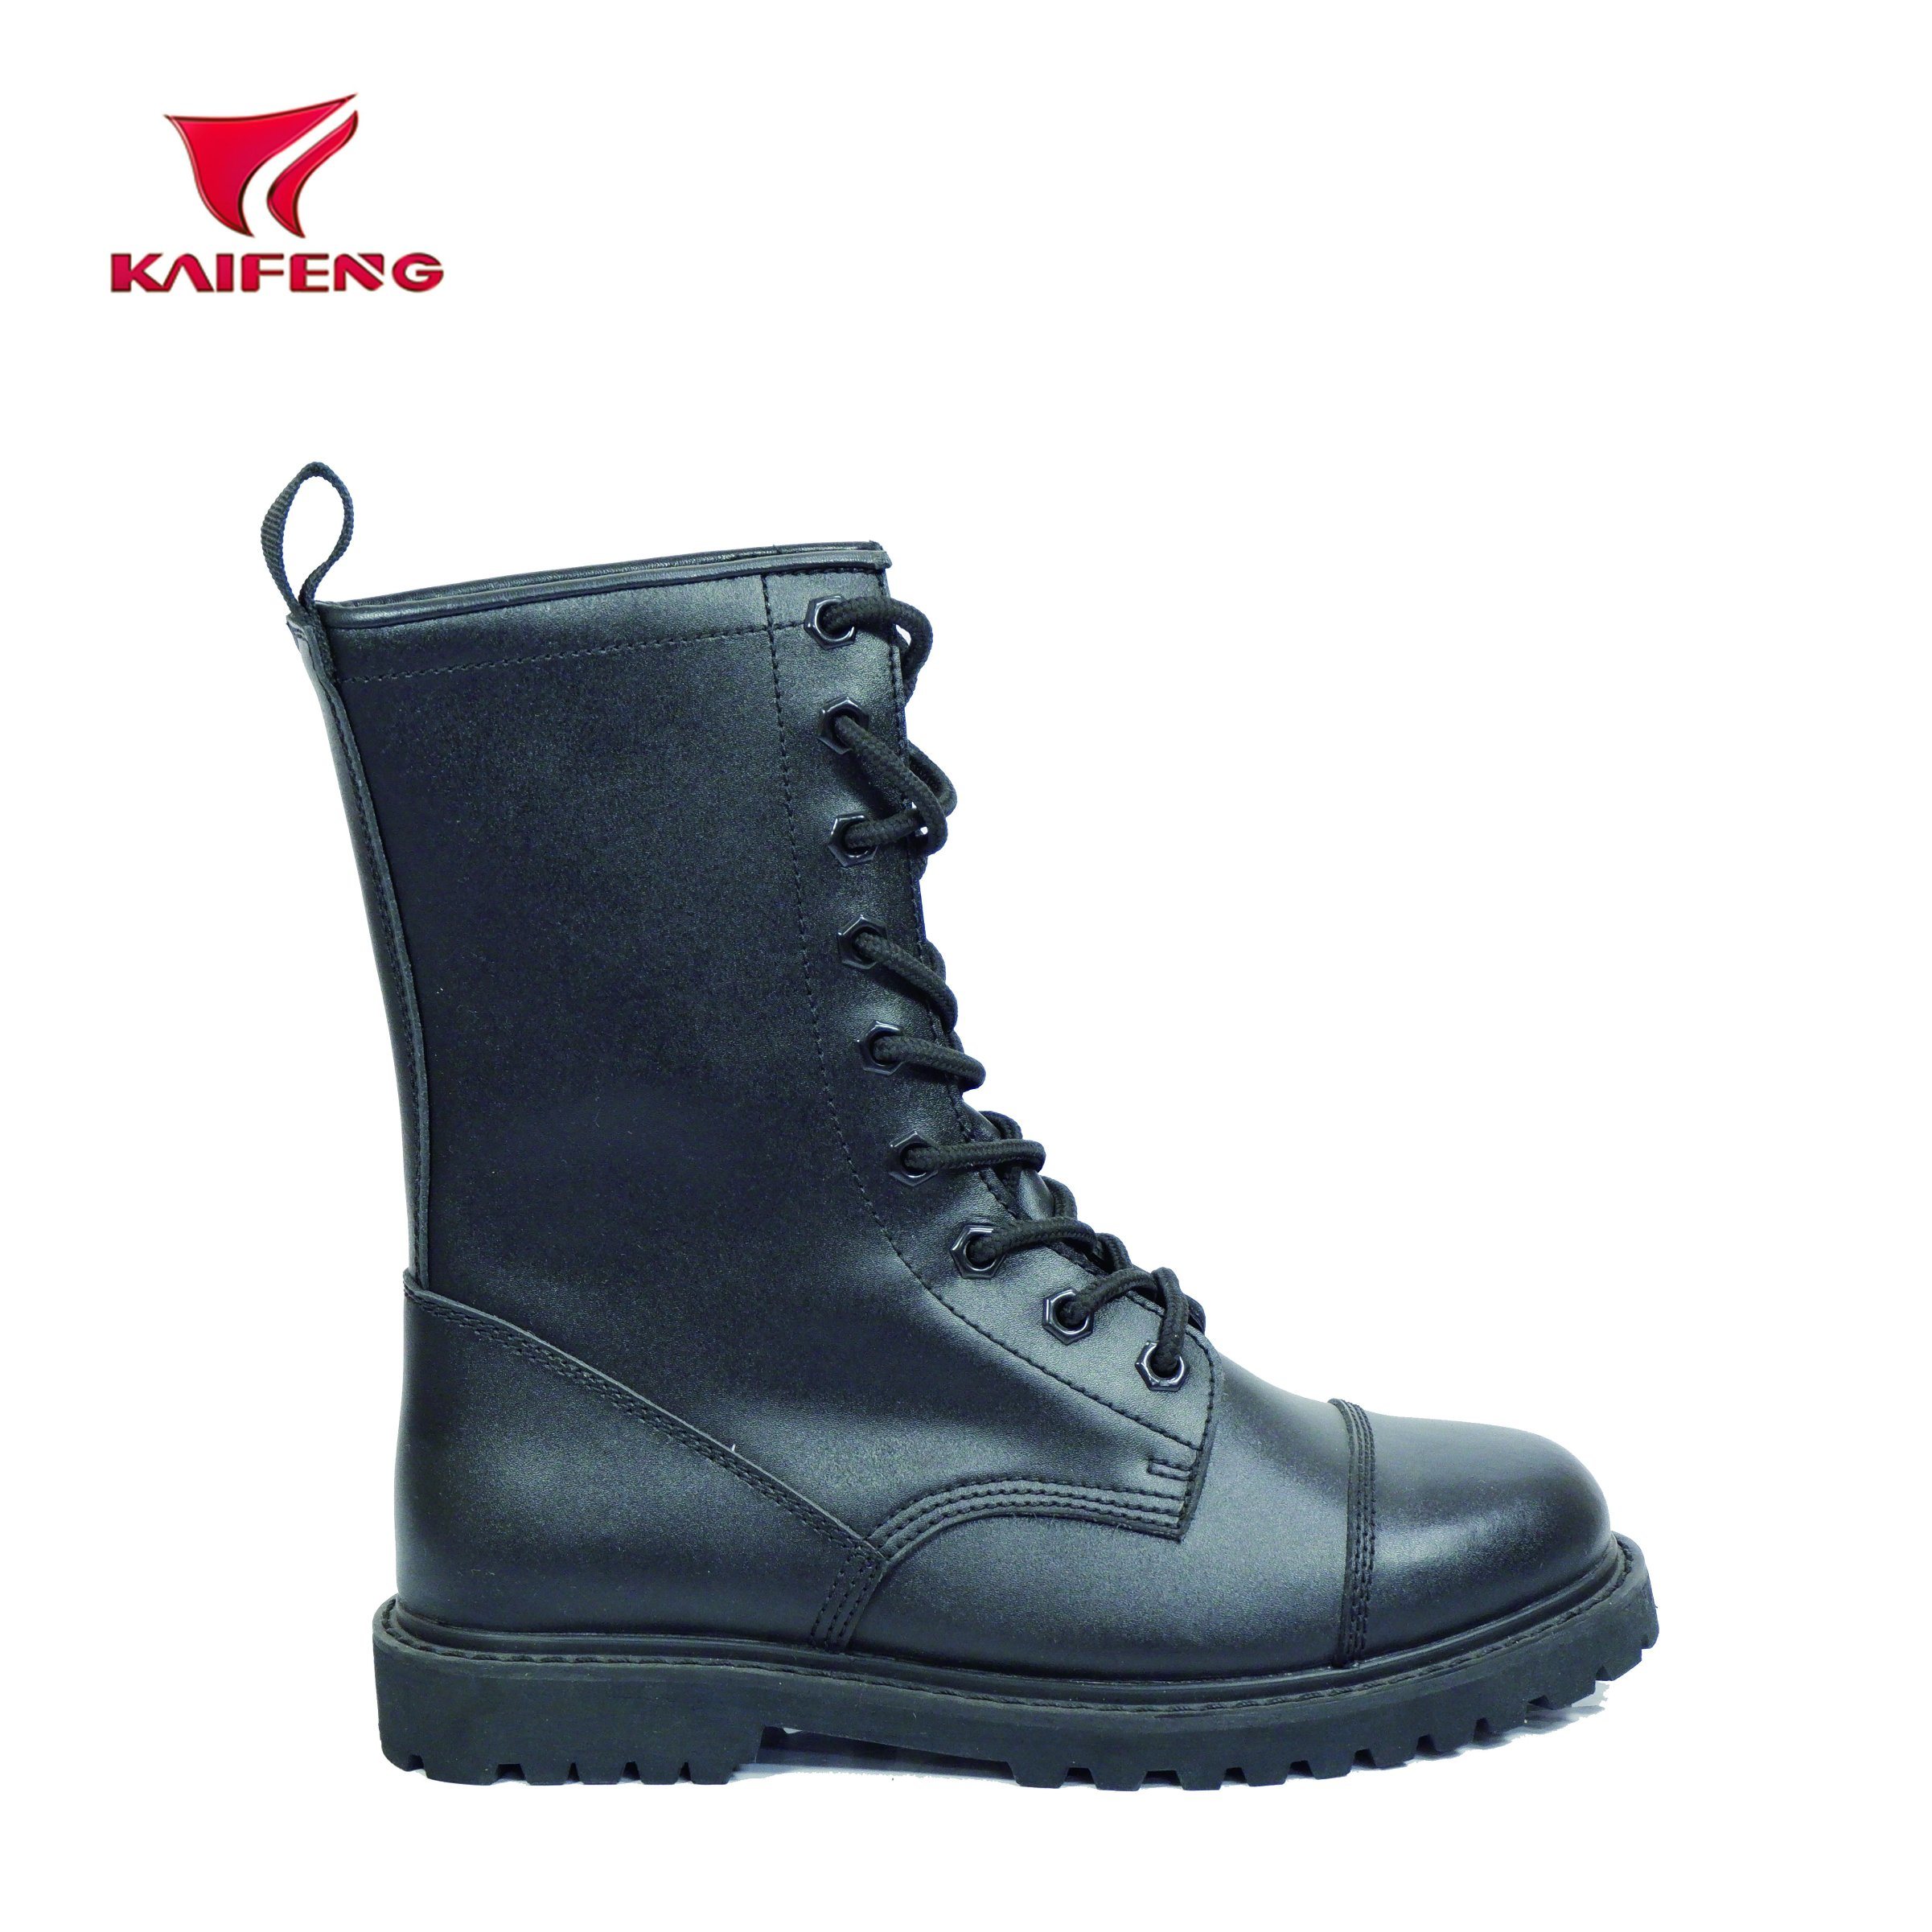 Full Grain Leather Military Boot with Point Toe